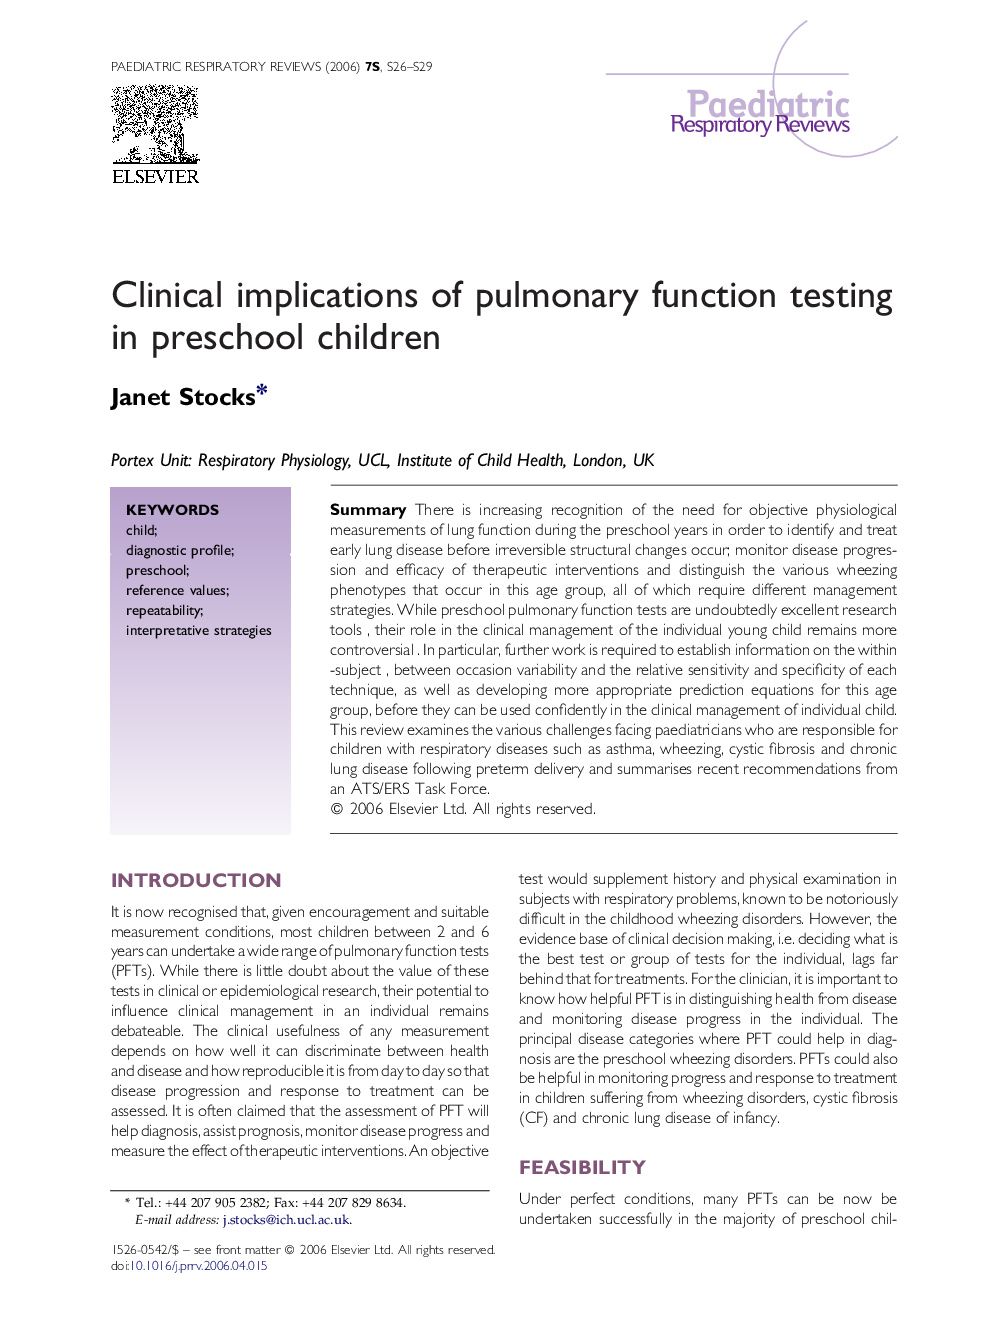 Clinical implications of pulmonary function testing in preschool children